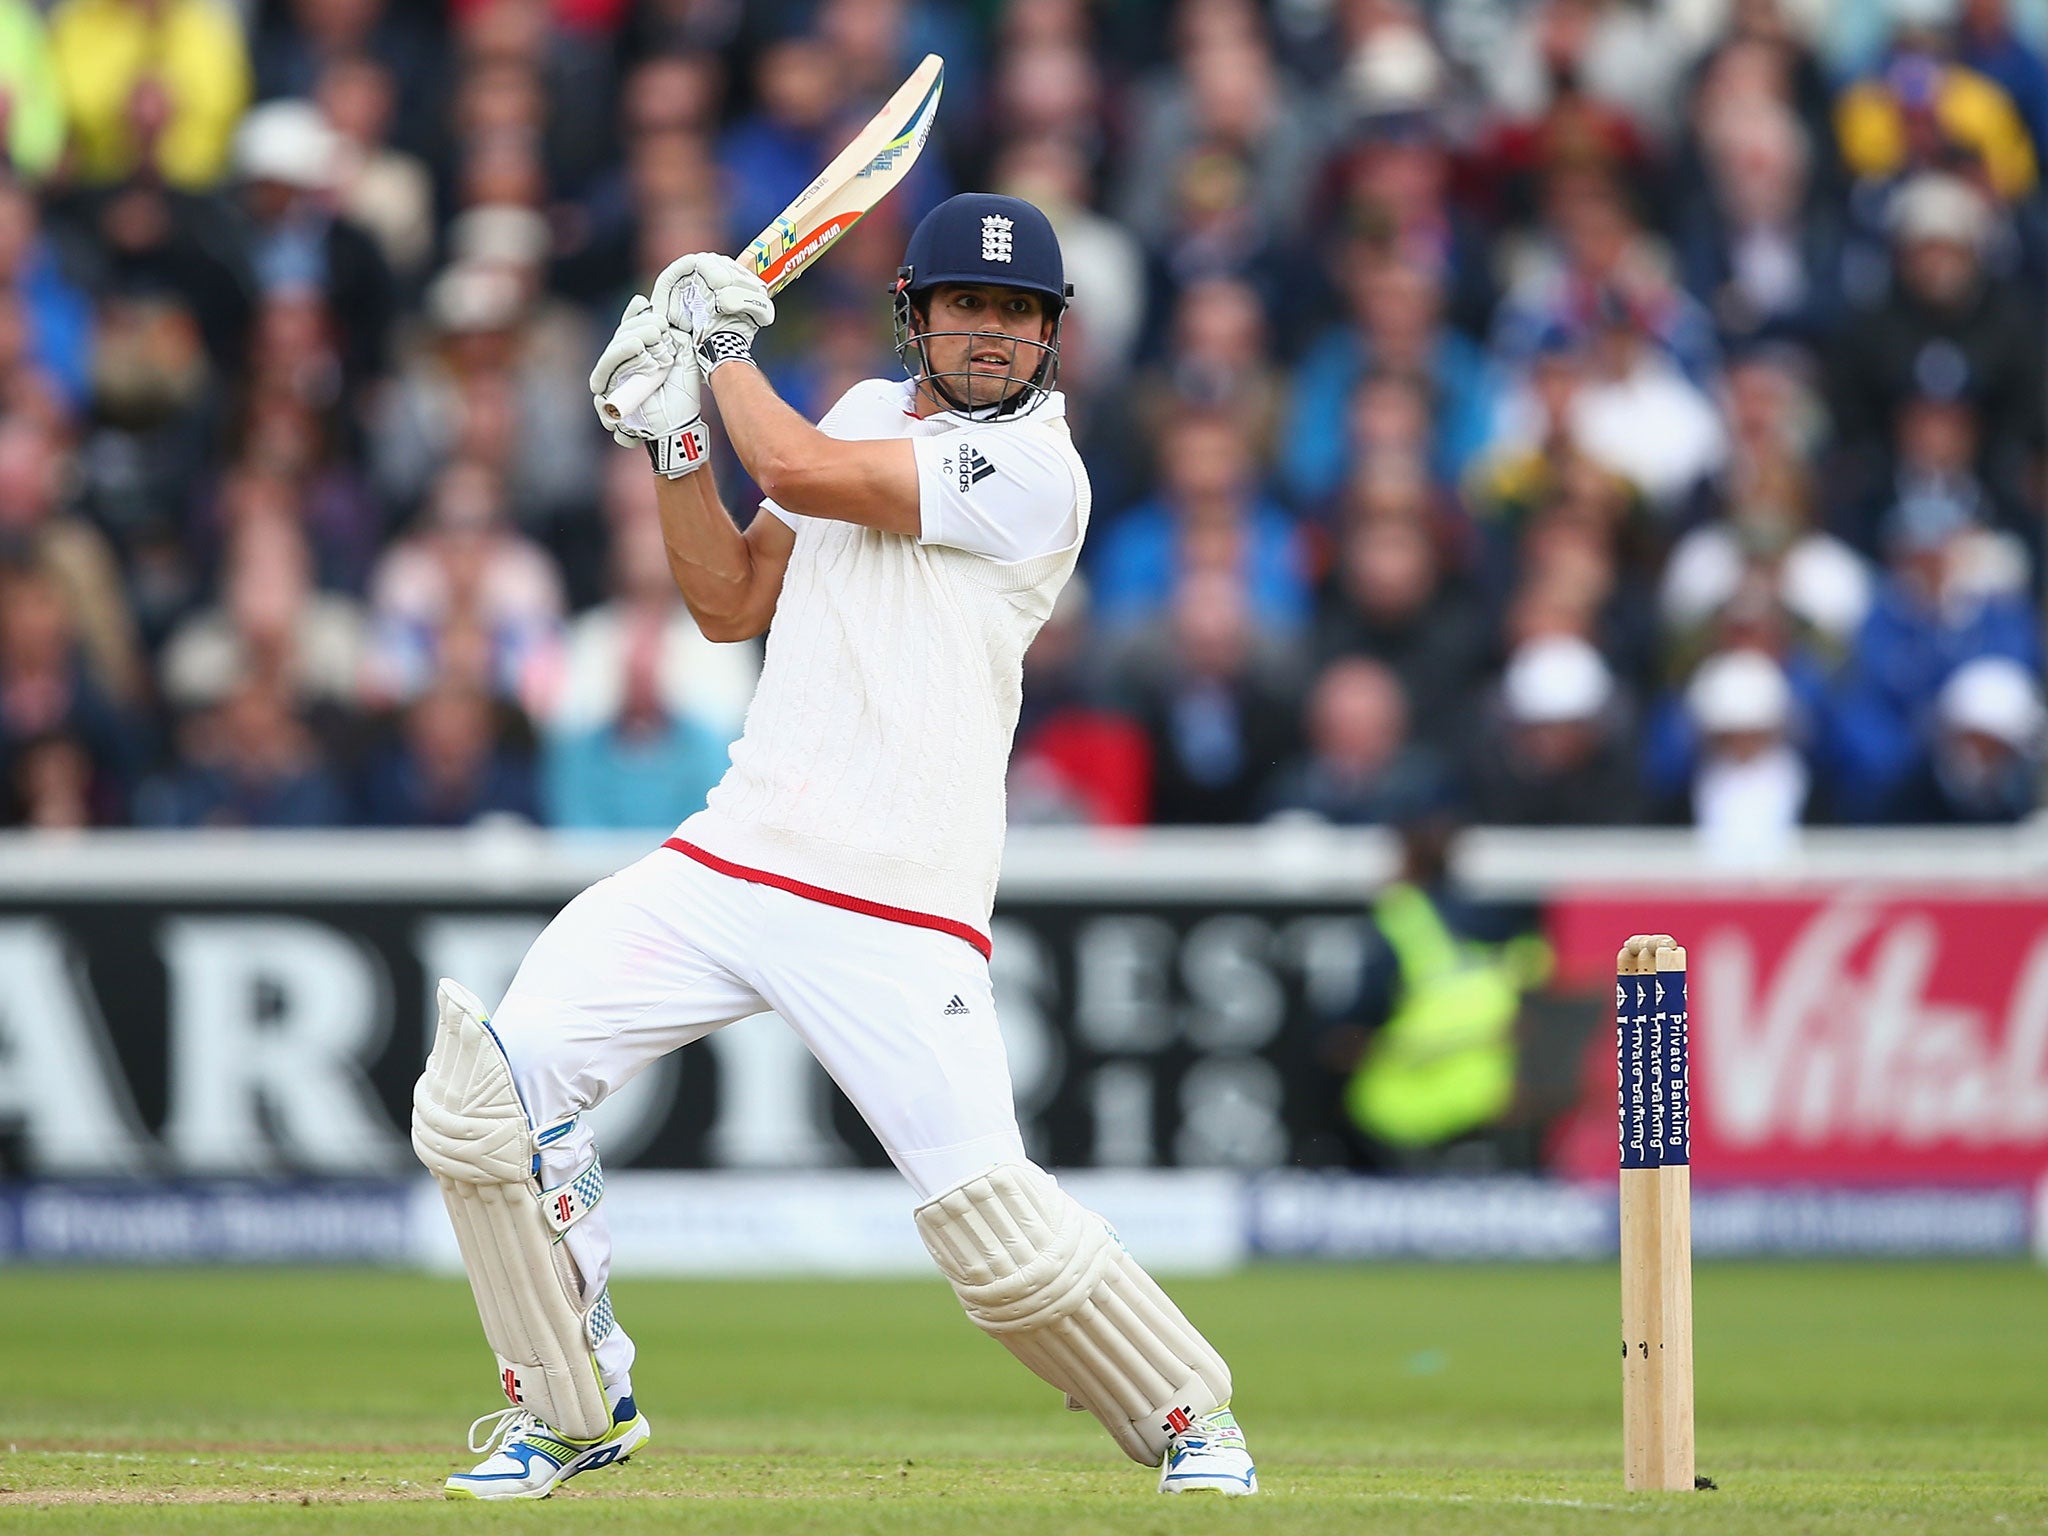 Alastair Cook bats for England during the Third Test